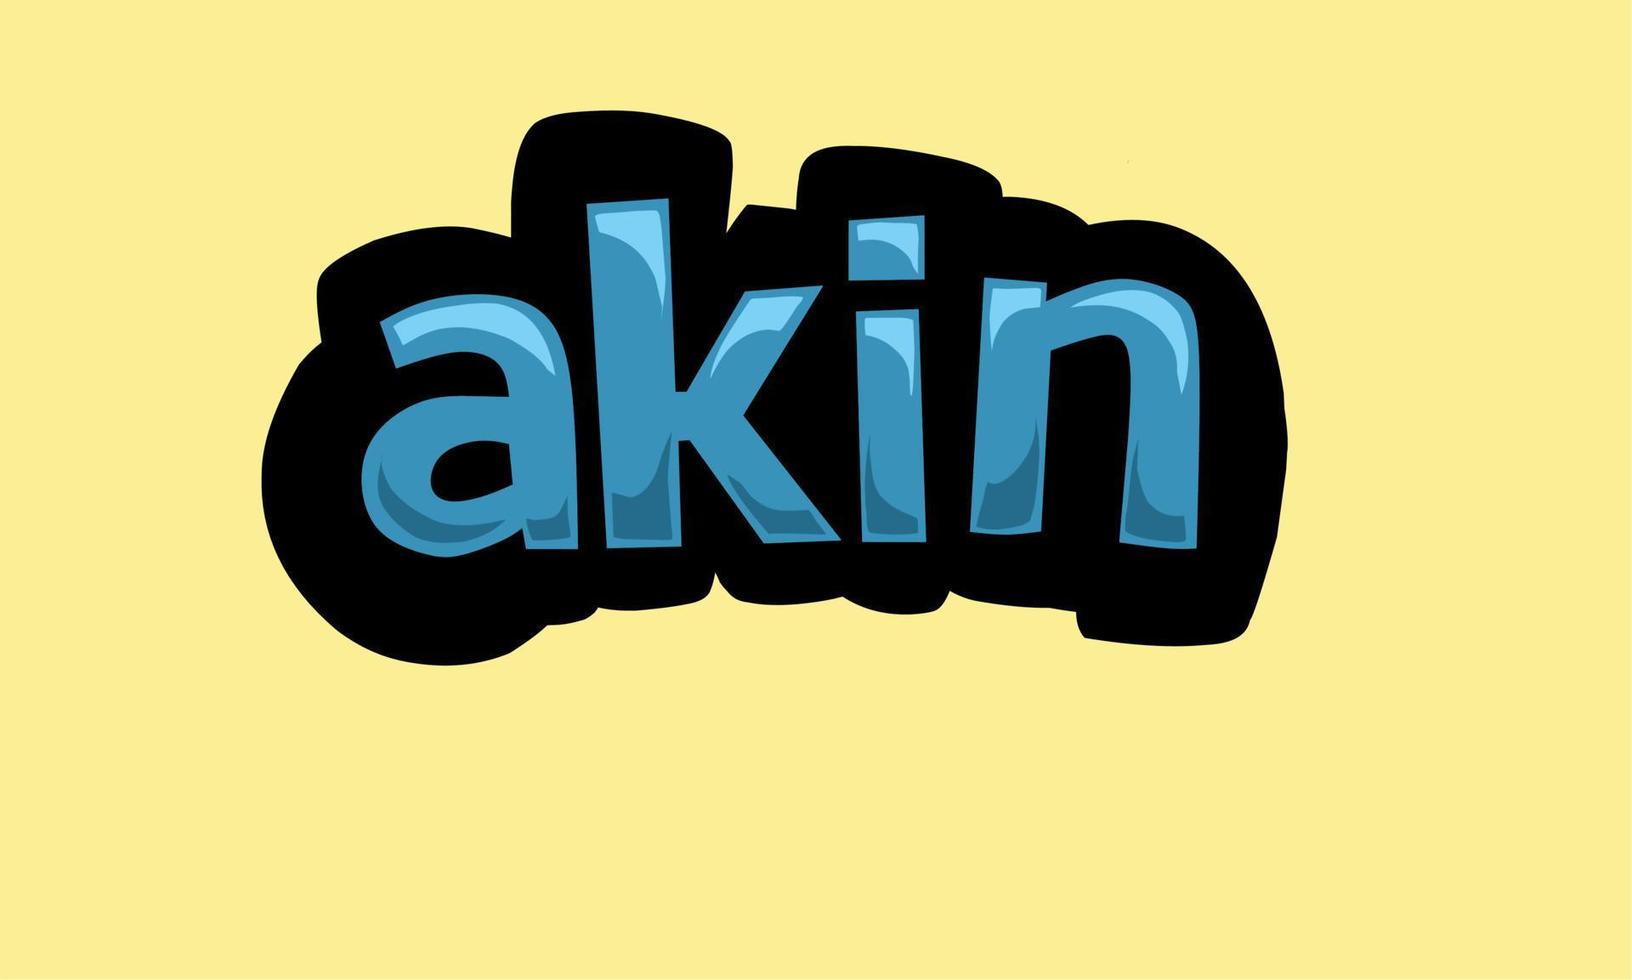 AKIN writing vector design on a yellow background